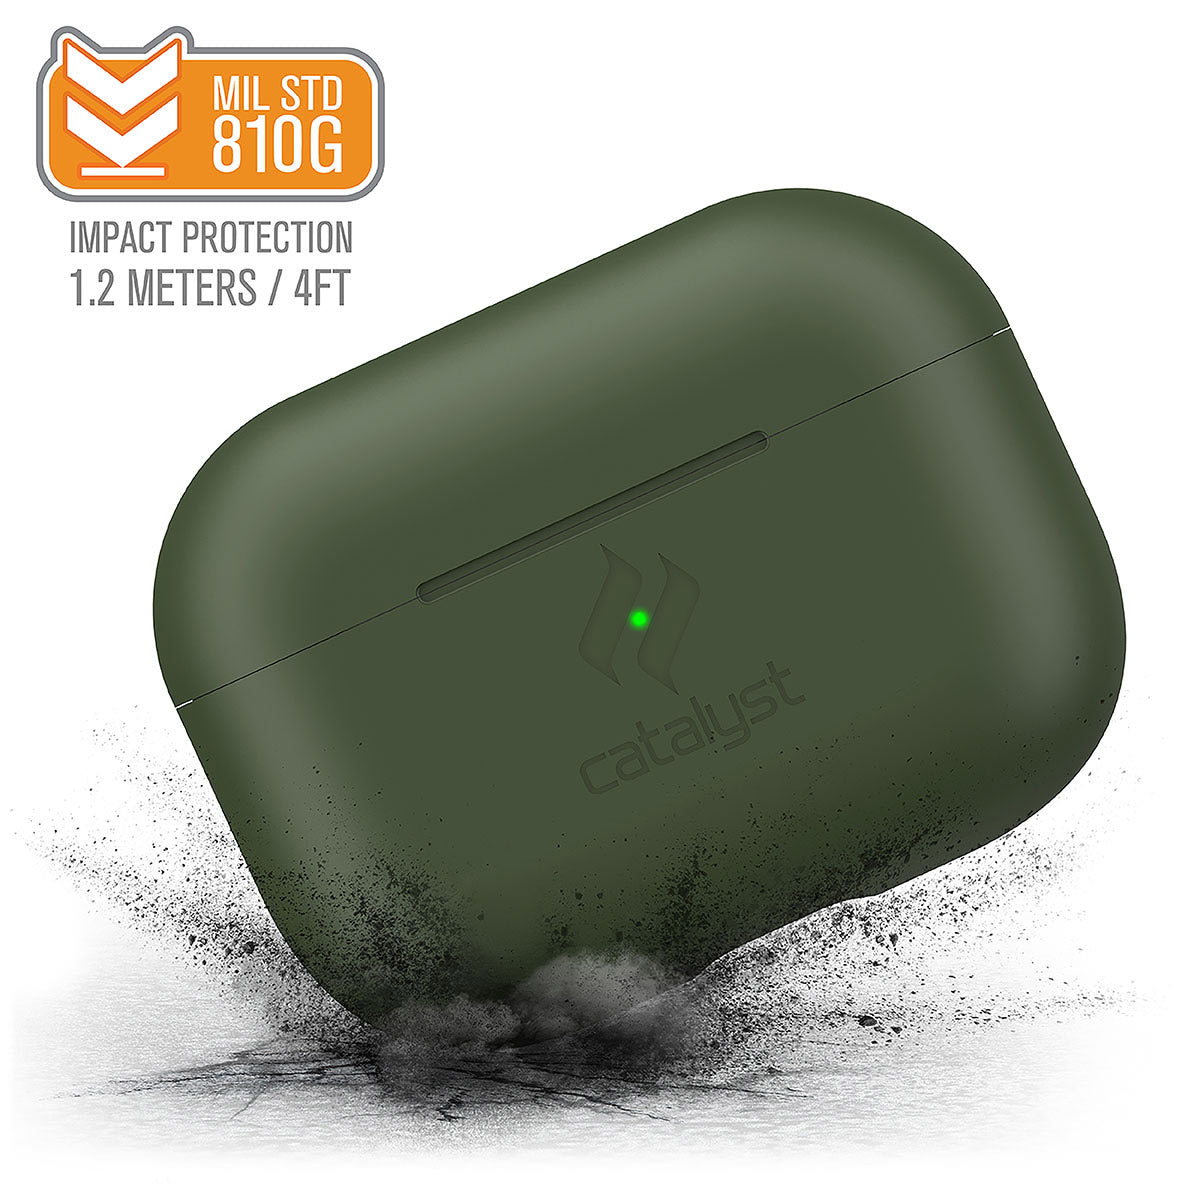 Catalyst airpods pro gen 2/1 slim case showing how drop proof the case is in an army green colorway text reads MIL STD 810G impact protection 1.2 meters/4FT